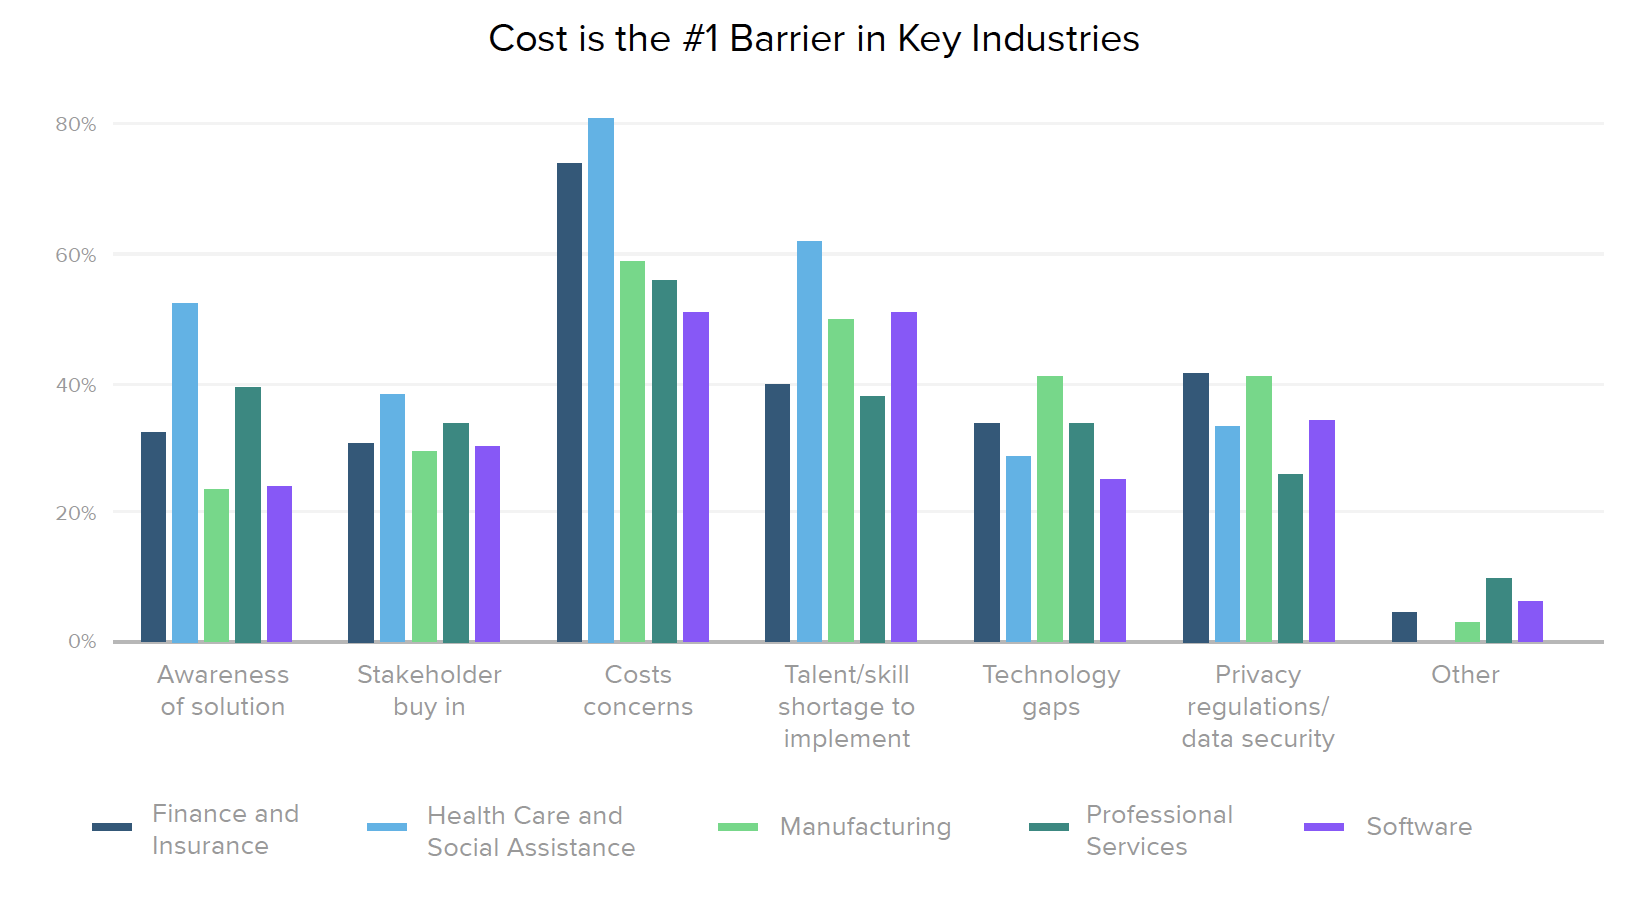 Cost is the #1 Barrier in Key Industries